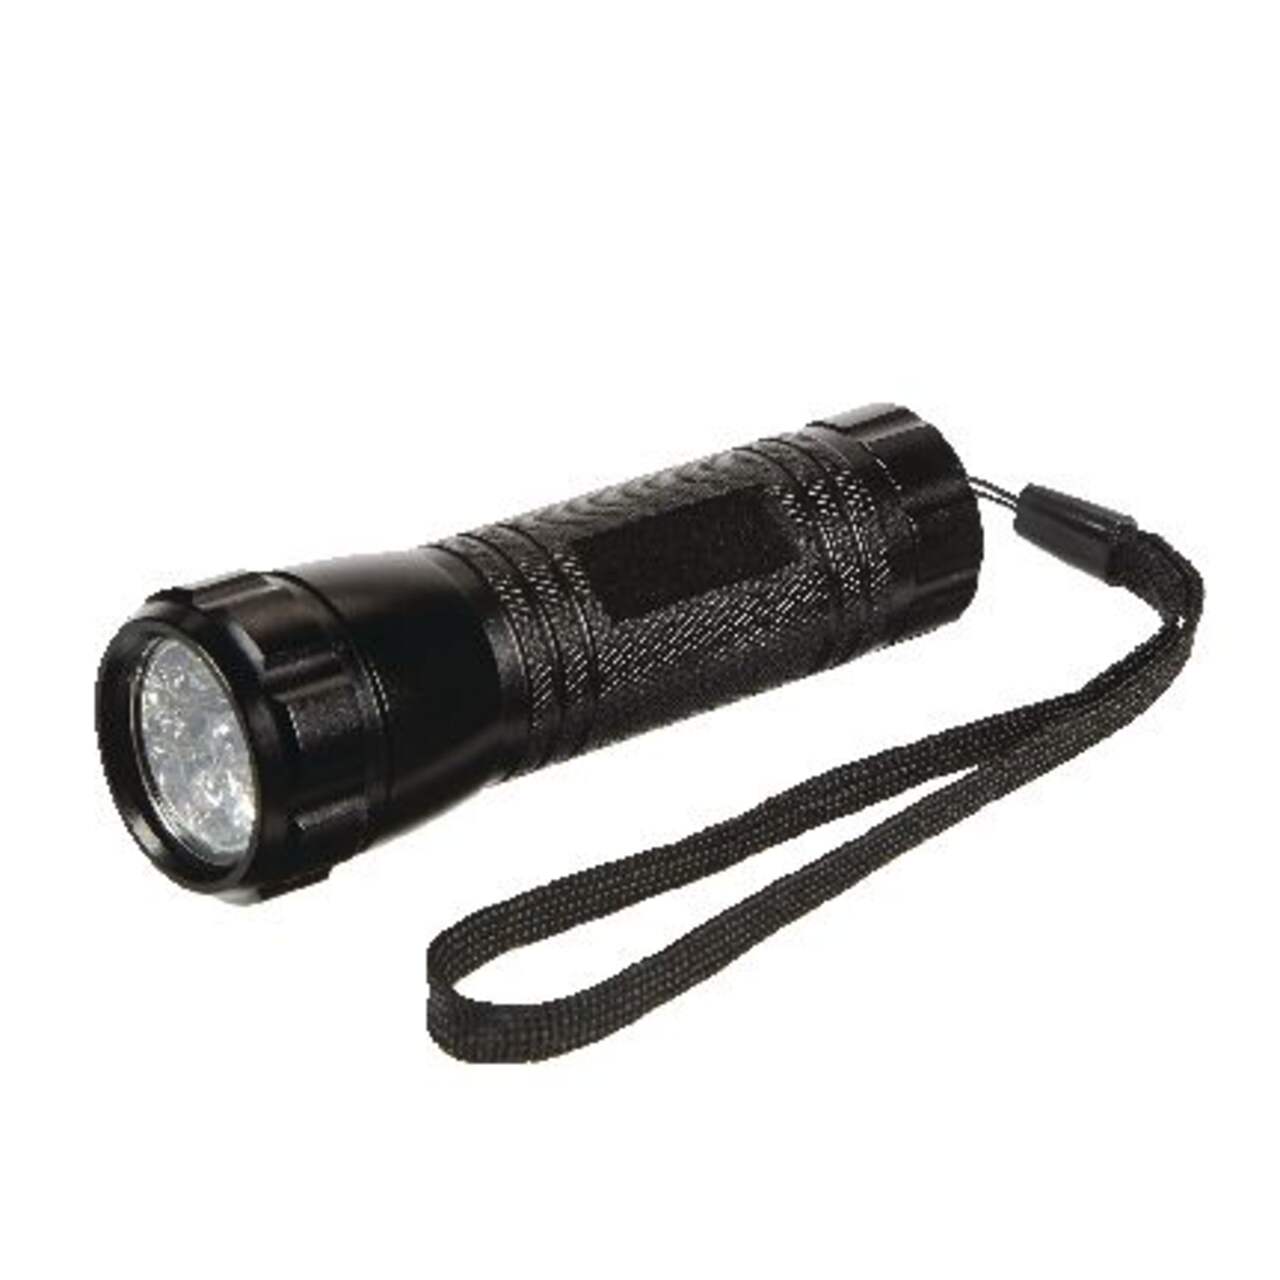 https://media-www.canadiantire.ca/product/fixing/hardware/household-flashlights/0653032/certified-9-bulb-uv-flashlight-blacklight-d064f79d-9160-48c9-8c8a-59a744ed6f15-jpgrendition.jpg?imdensity=1&imwidth=640&impolicy=mZoom